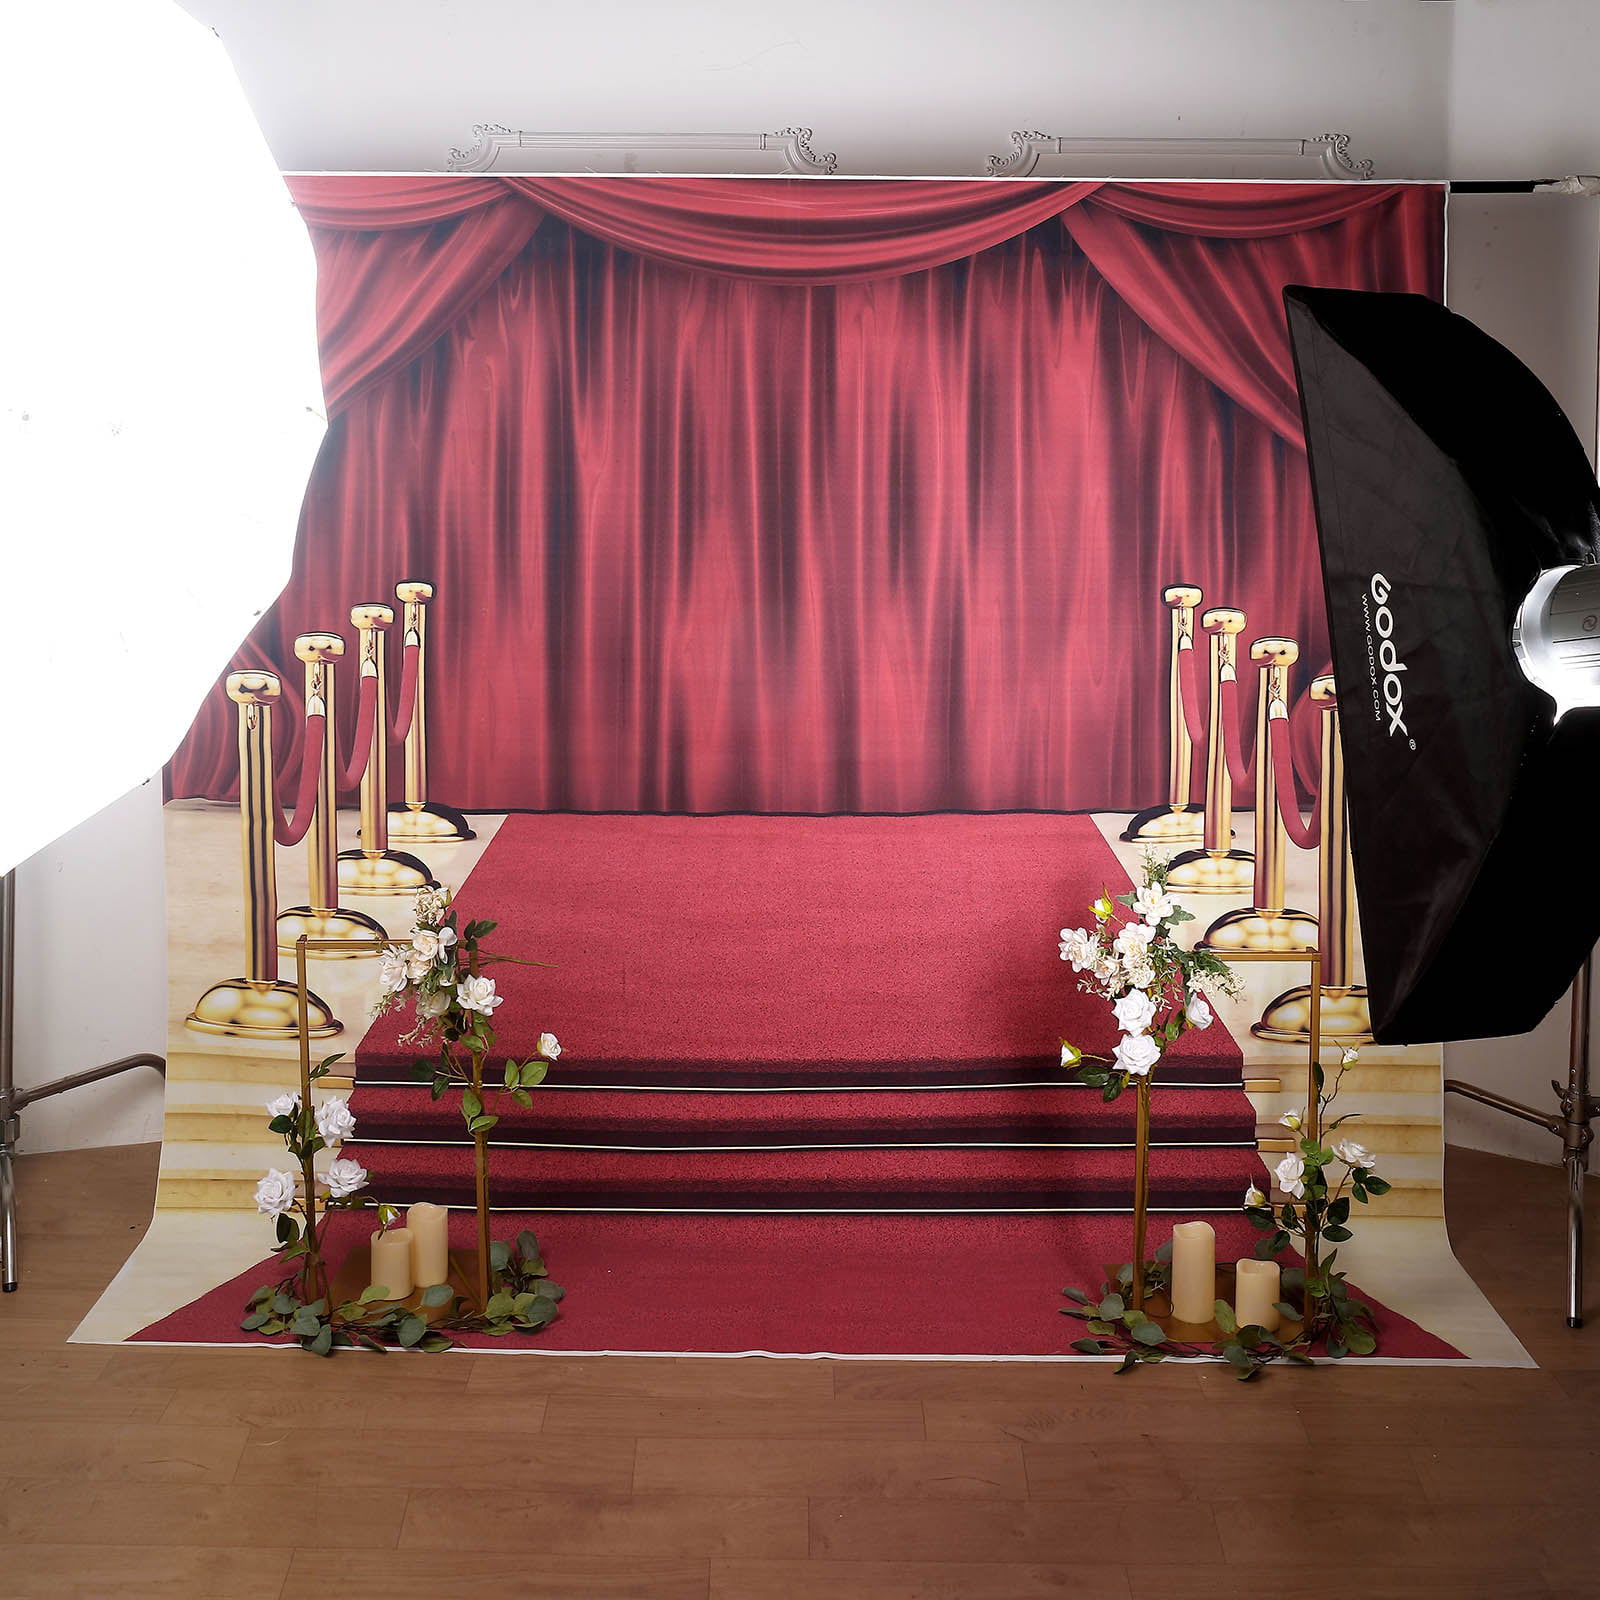 kolitt CYLYH 6x8ft Hollywood Party Decorations Backdrops Red Carpet Vinyl Photography Backdrop Baby Shower Birthday Party Photo Background Studio Prop D105